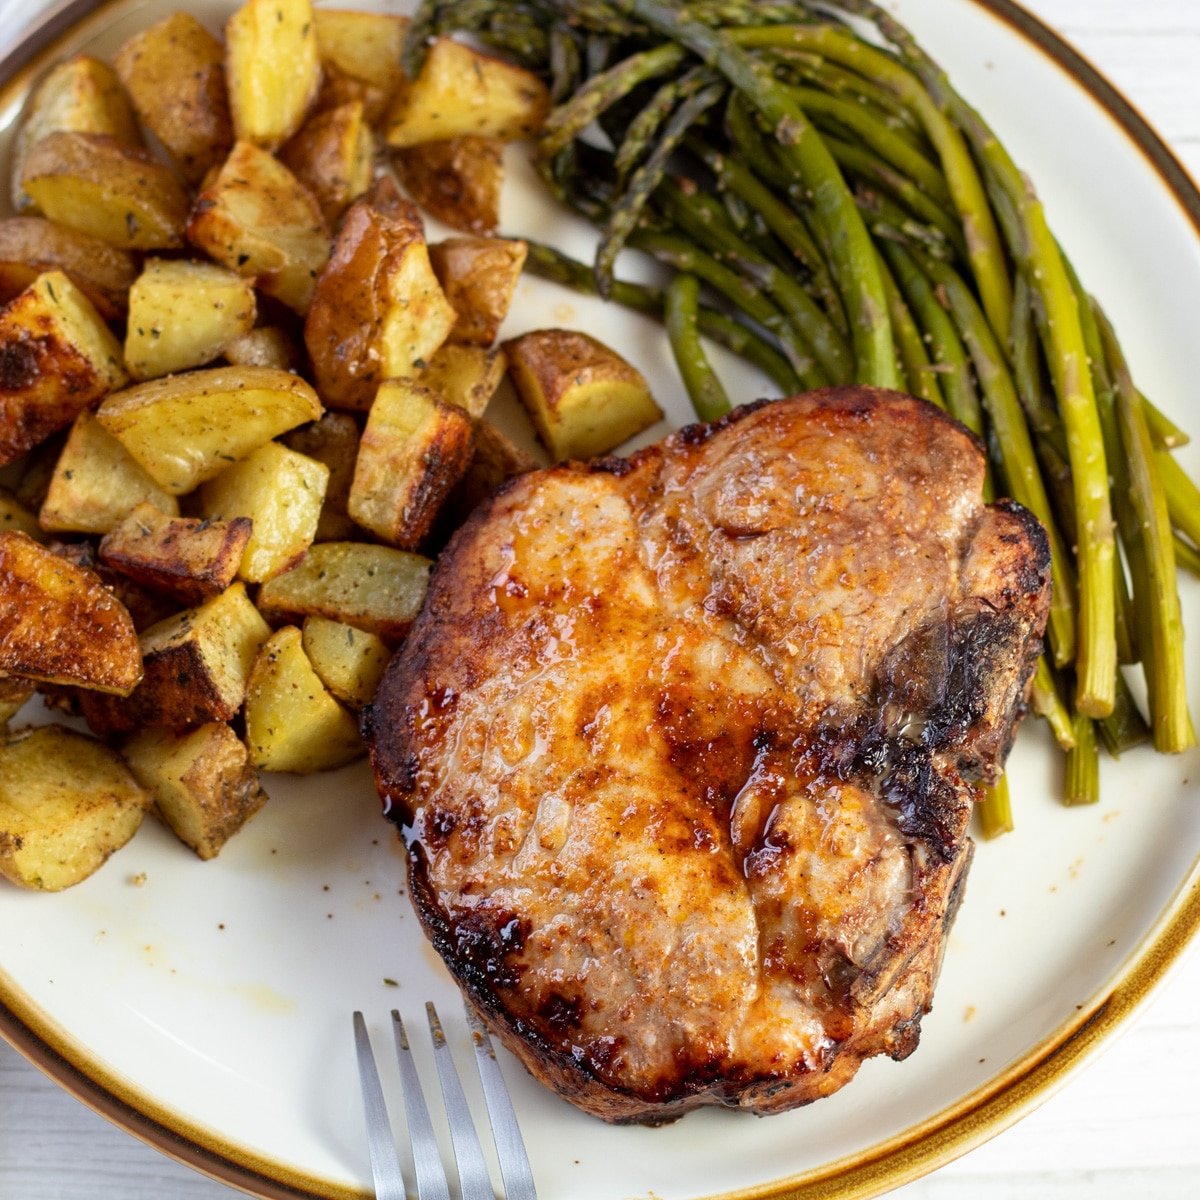 Super tasty, tender, and juicy air fryer thick cut pork chops served on tan plate with brown rim.